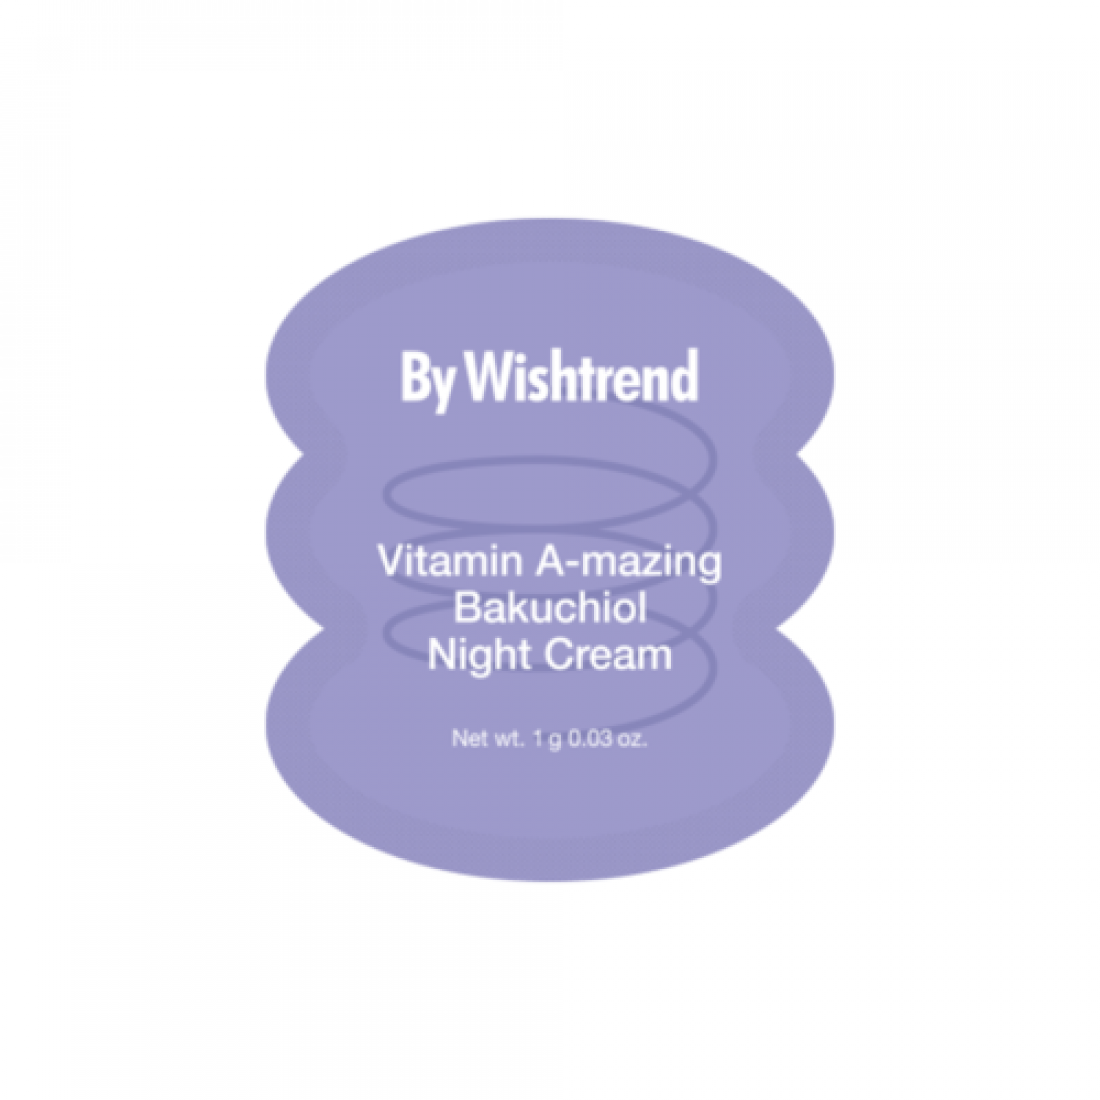 Крем by wishtrend vitamin a mazing bakuchiol. By Wishtrend пробник Vitamin a-mazing Bakuchiol Night Cream (1 г). By Wishtrend крем с ретиналь. By Wishtrend Vitamin a-mazing Bakuchiol Night Cream 30ml. By Wishtrend Бакучиол.